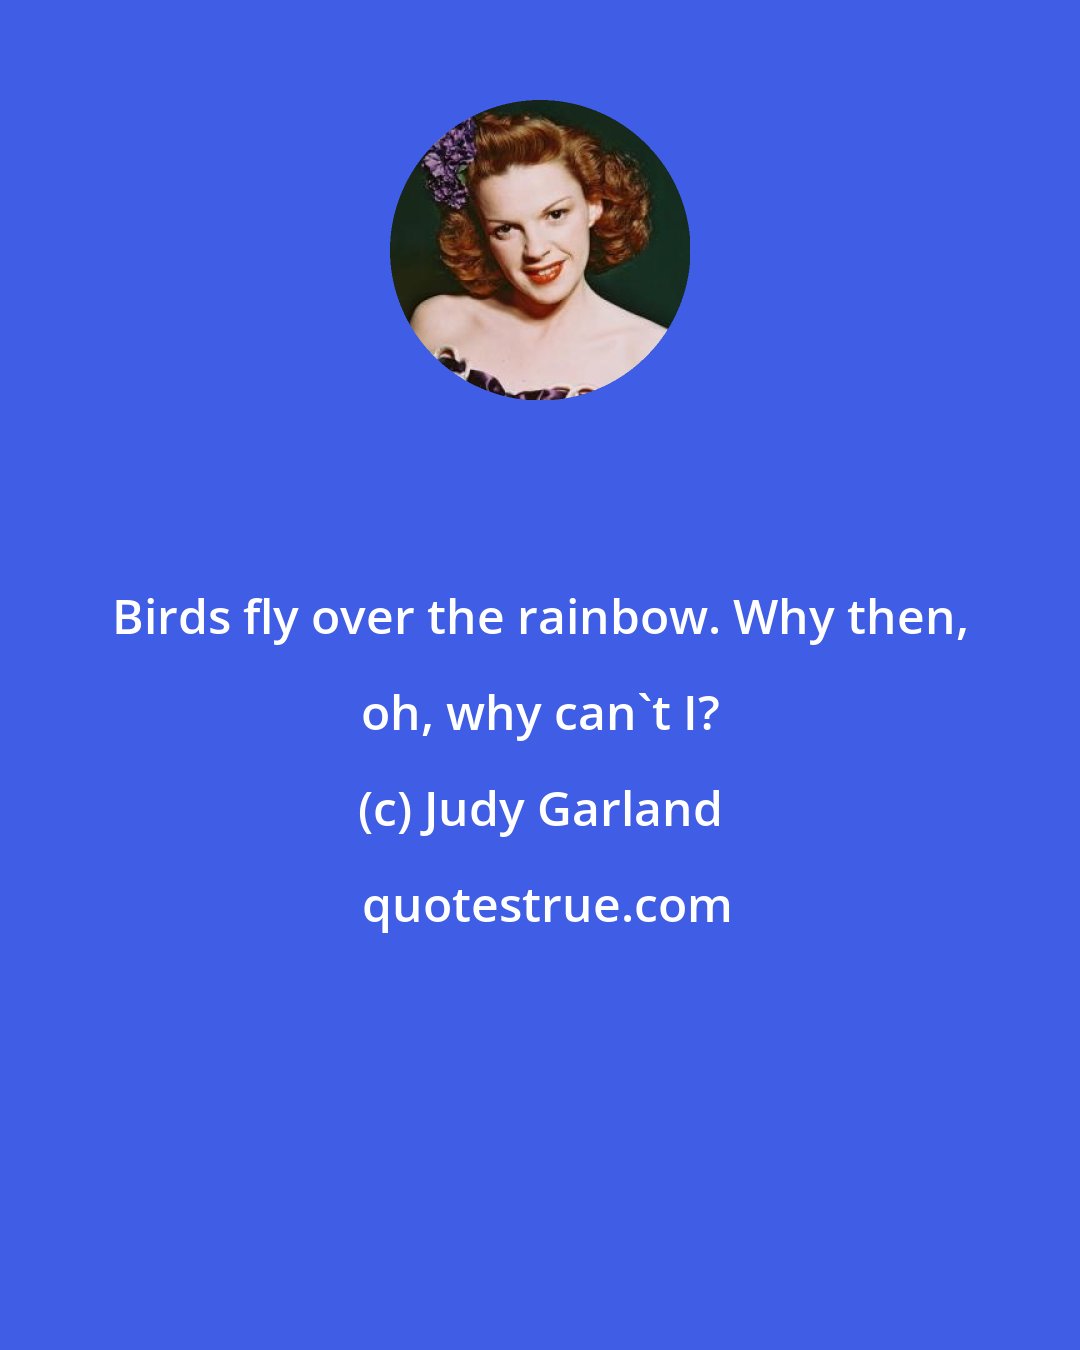 Judy Garland: Birds fly over the rainbow. Why then, oh, why can't I?